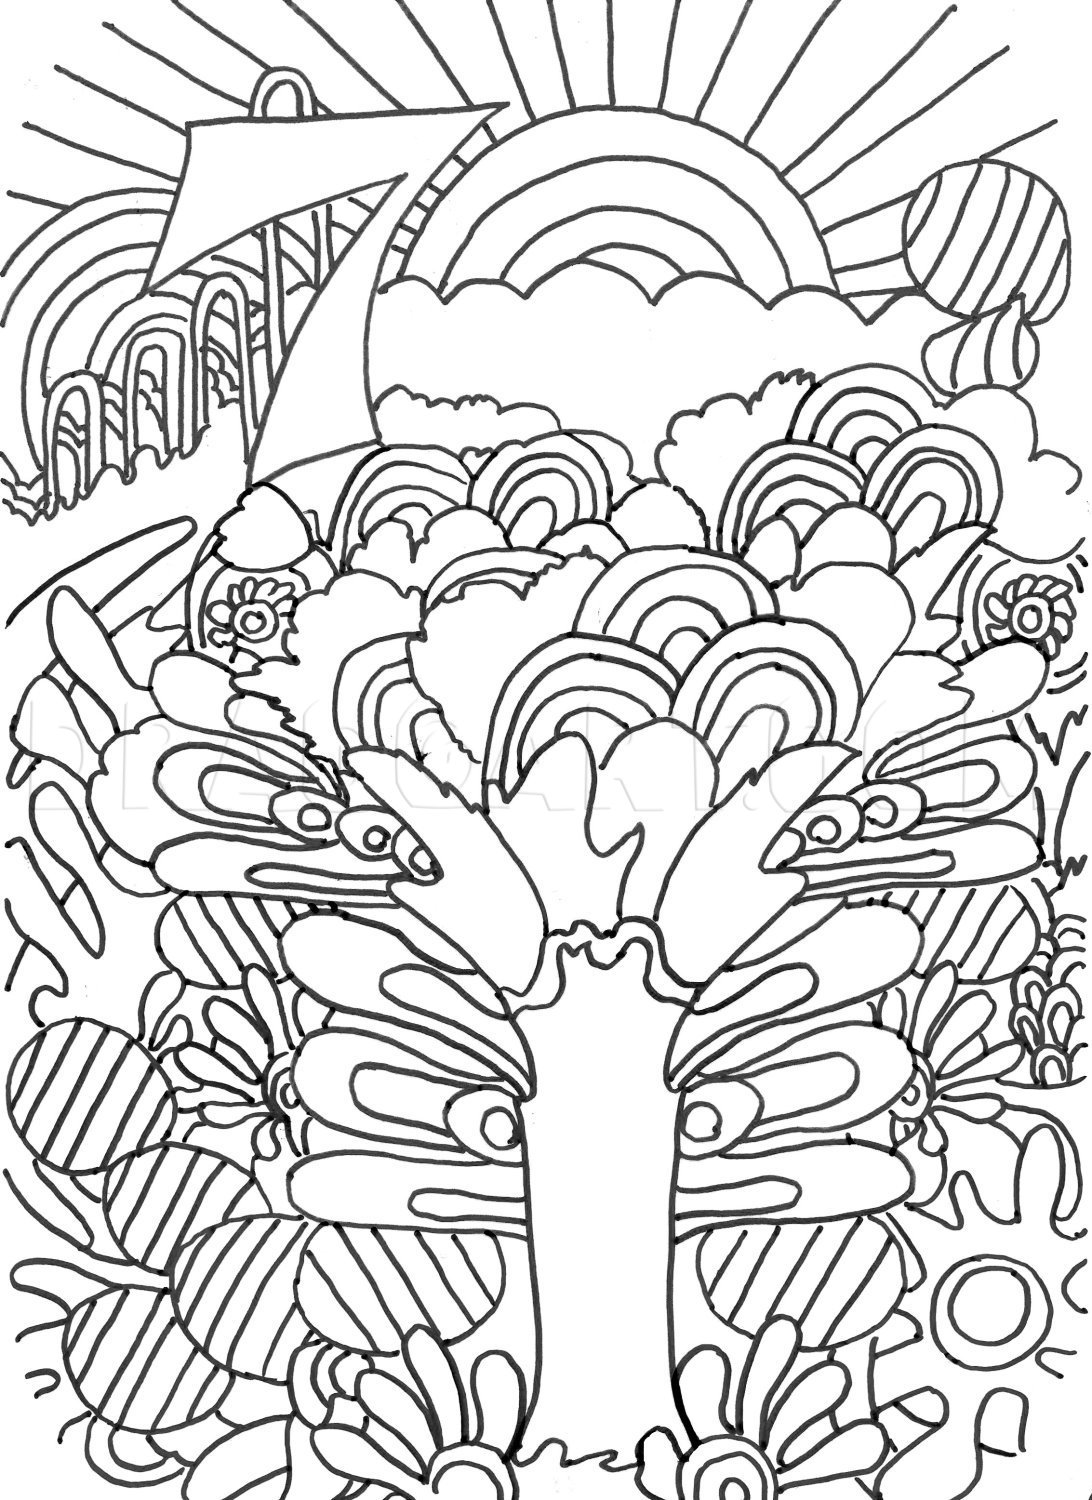 Printable Aesthetic Trippy Coloring Pages